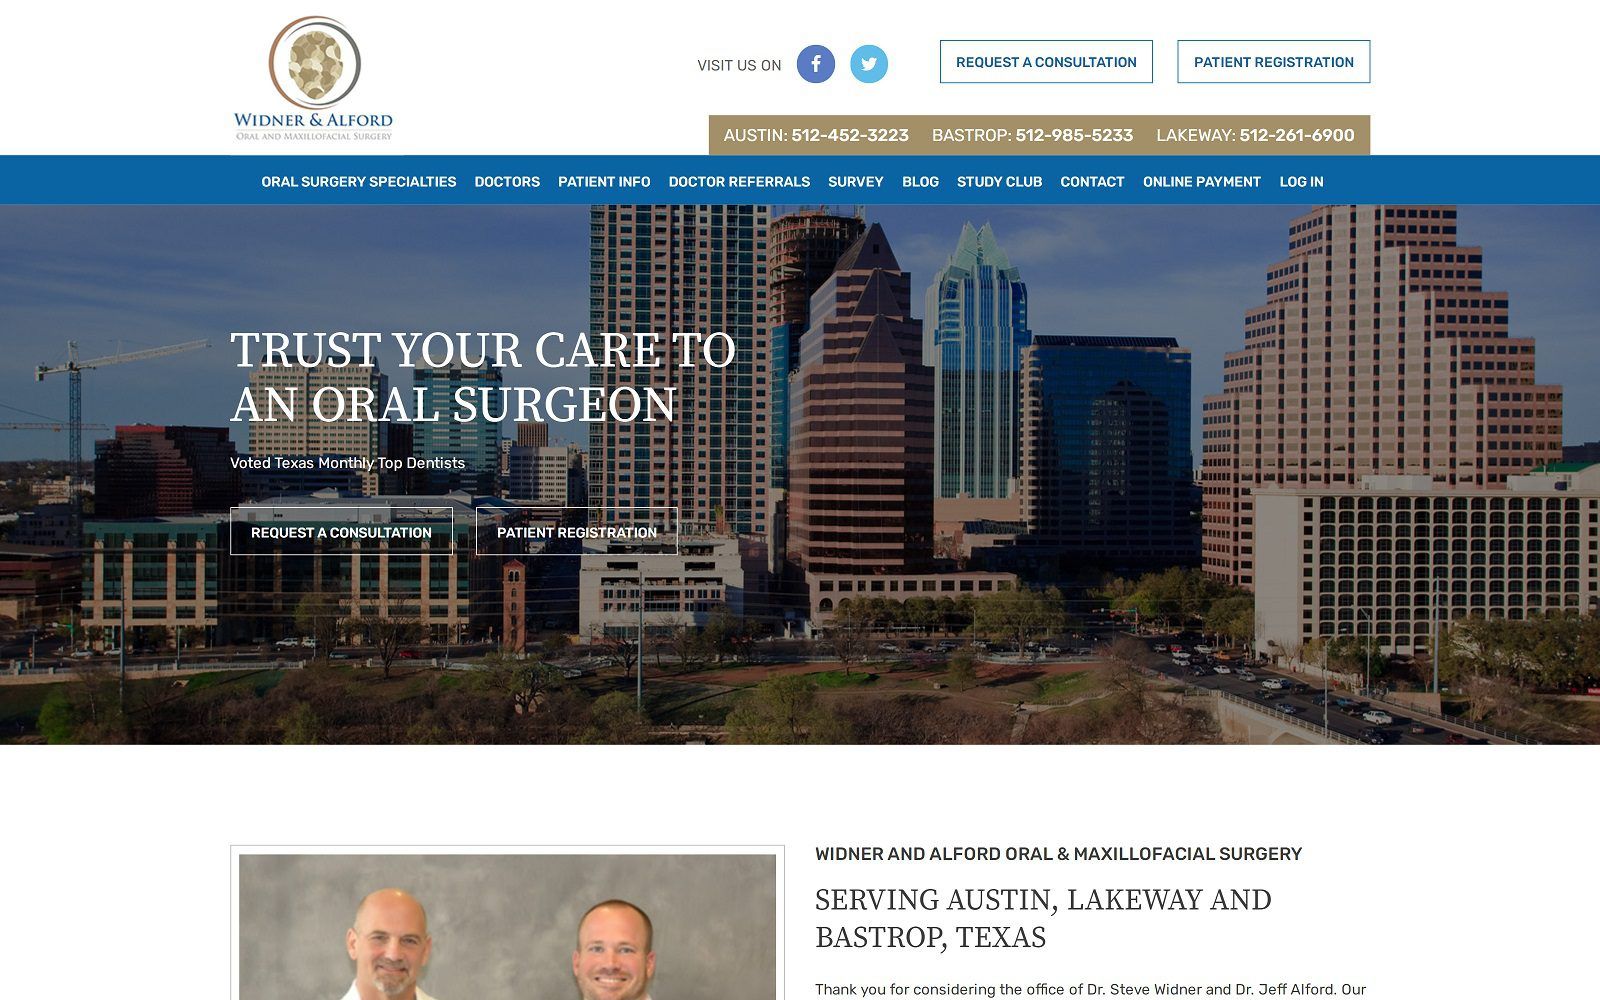 The screenshot of widner & alford oral and maxillofacial surgery website